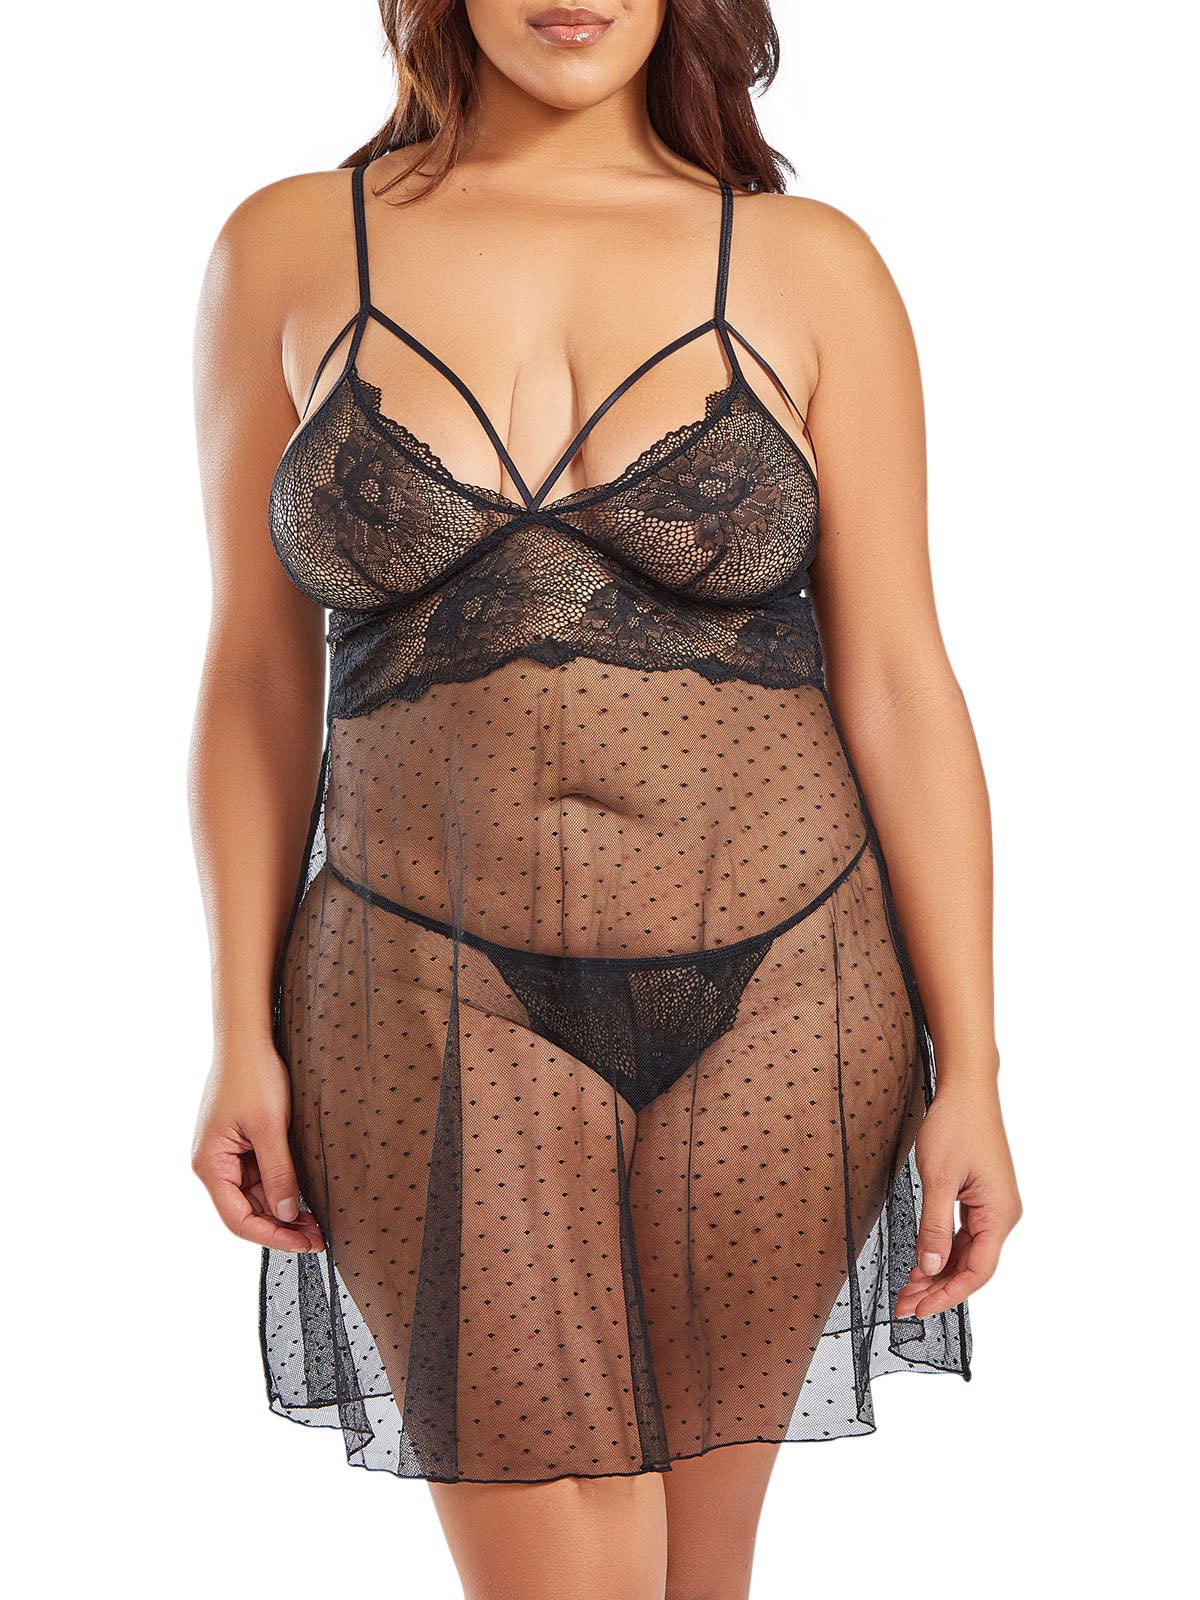 iCollection Babydoll Women's Everly Plus Size Babydoll Lingerie